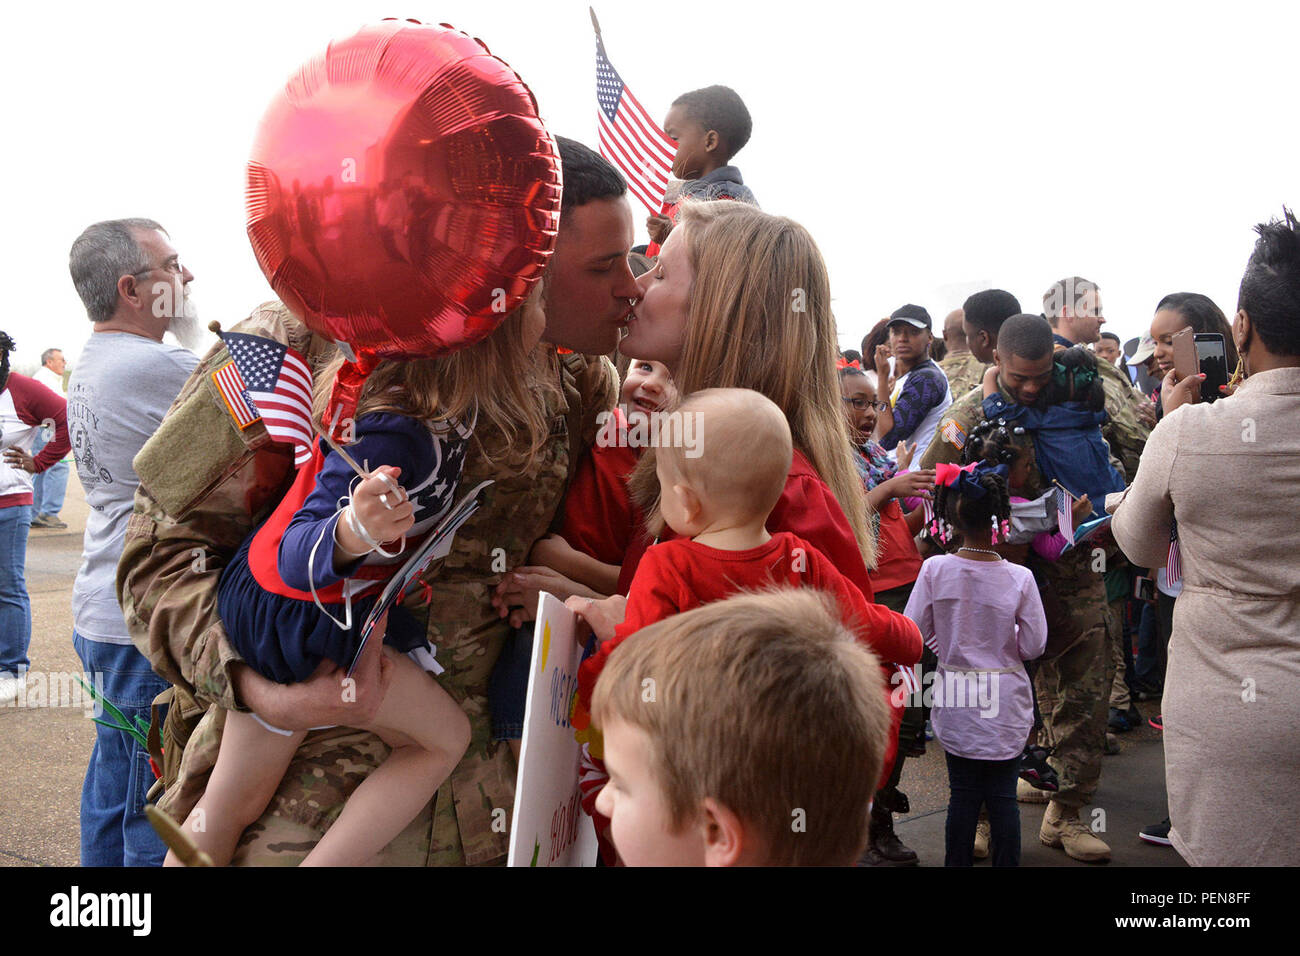 Staff Sgt. Chad Lawless, of Swartz, La., kisses his wife, Angela, and hugs his daughter, Lily, 4, and sons, Luke, 2, and Levi, 6 months. Lawless met Levi for the first time in person at the welcome-home event in Monroe, La., Dec. 24, 2015. More than 150 members of the Louisiana National Guard’s 1023rd Engineer Company, 528th Engineer Battalion just completed a 10-month deployment to Kuwait, with additional missions to Jordan, Iraq and Afghanistan. (U.S. Army National Guard photo by 1st Lt. Rebekah Malone) Stock Photo